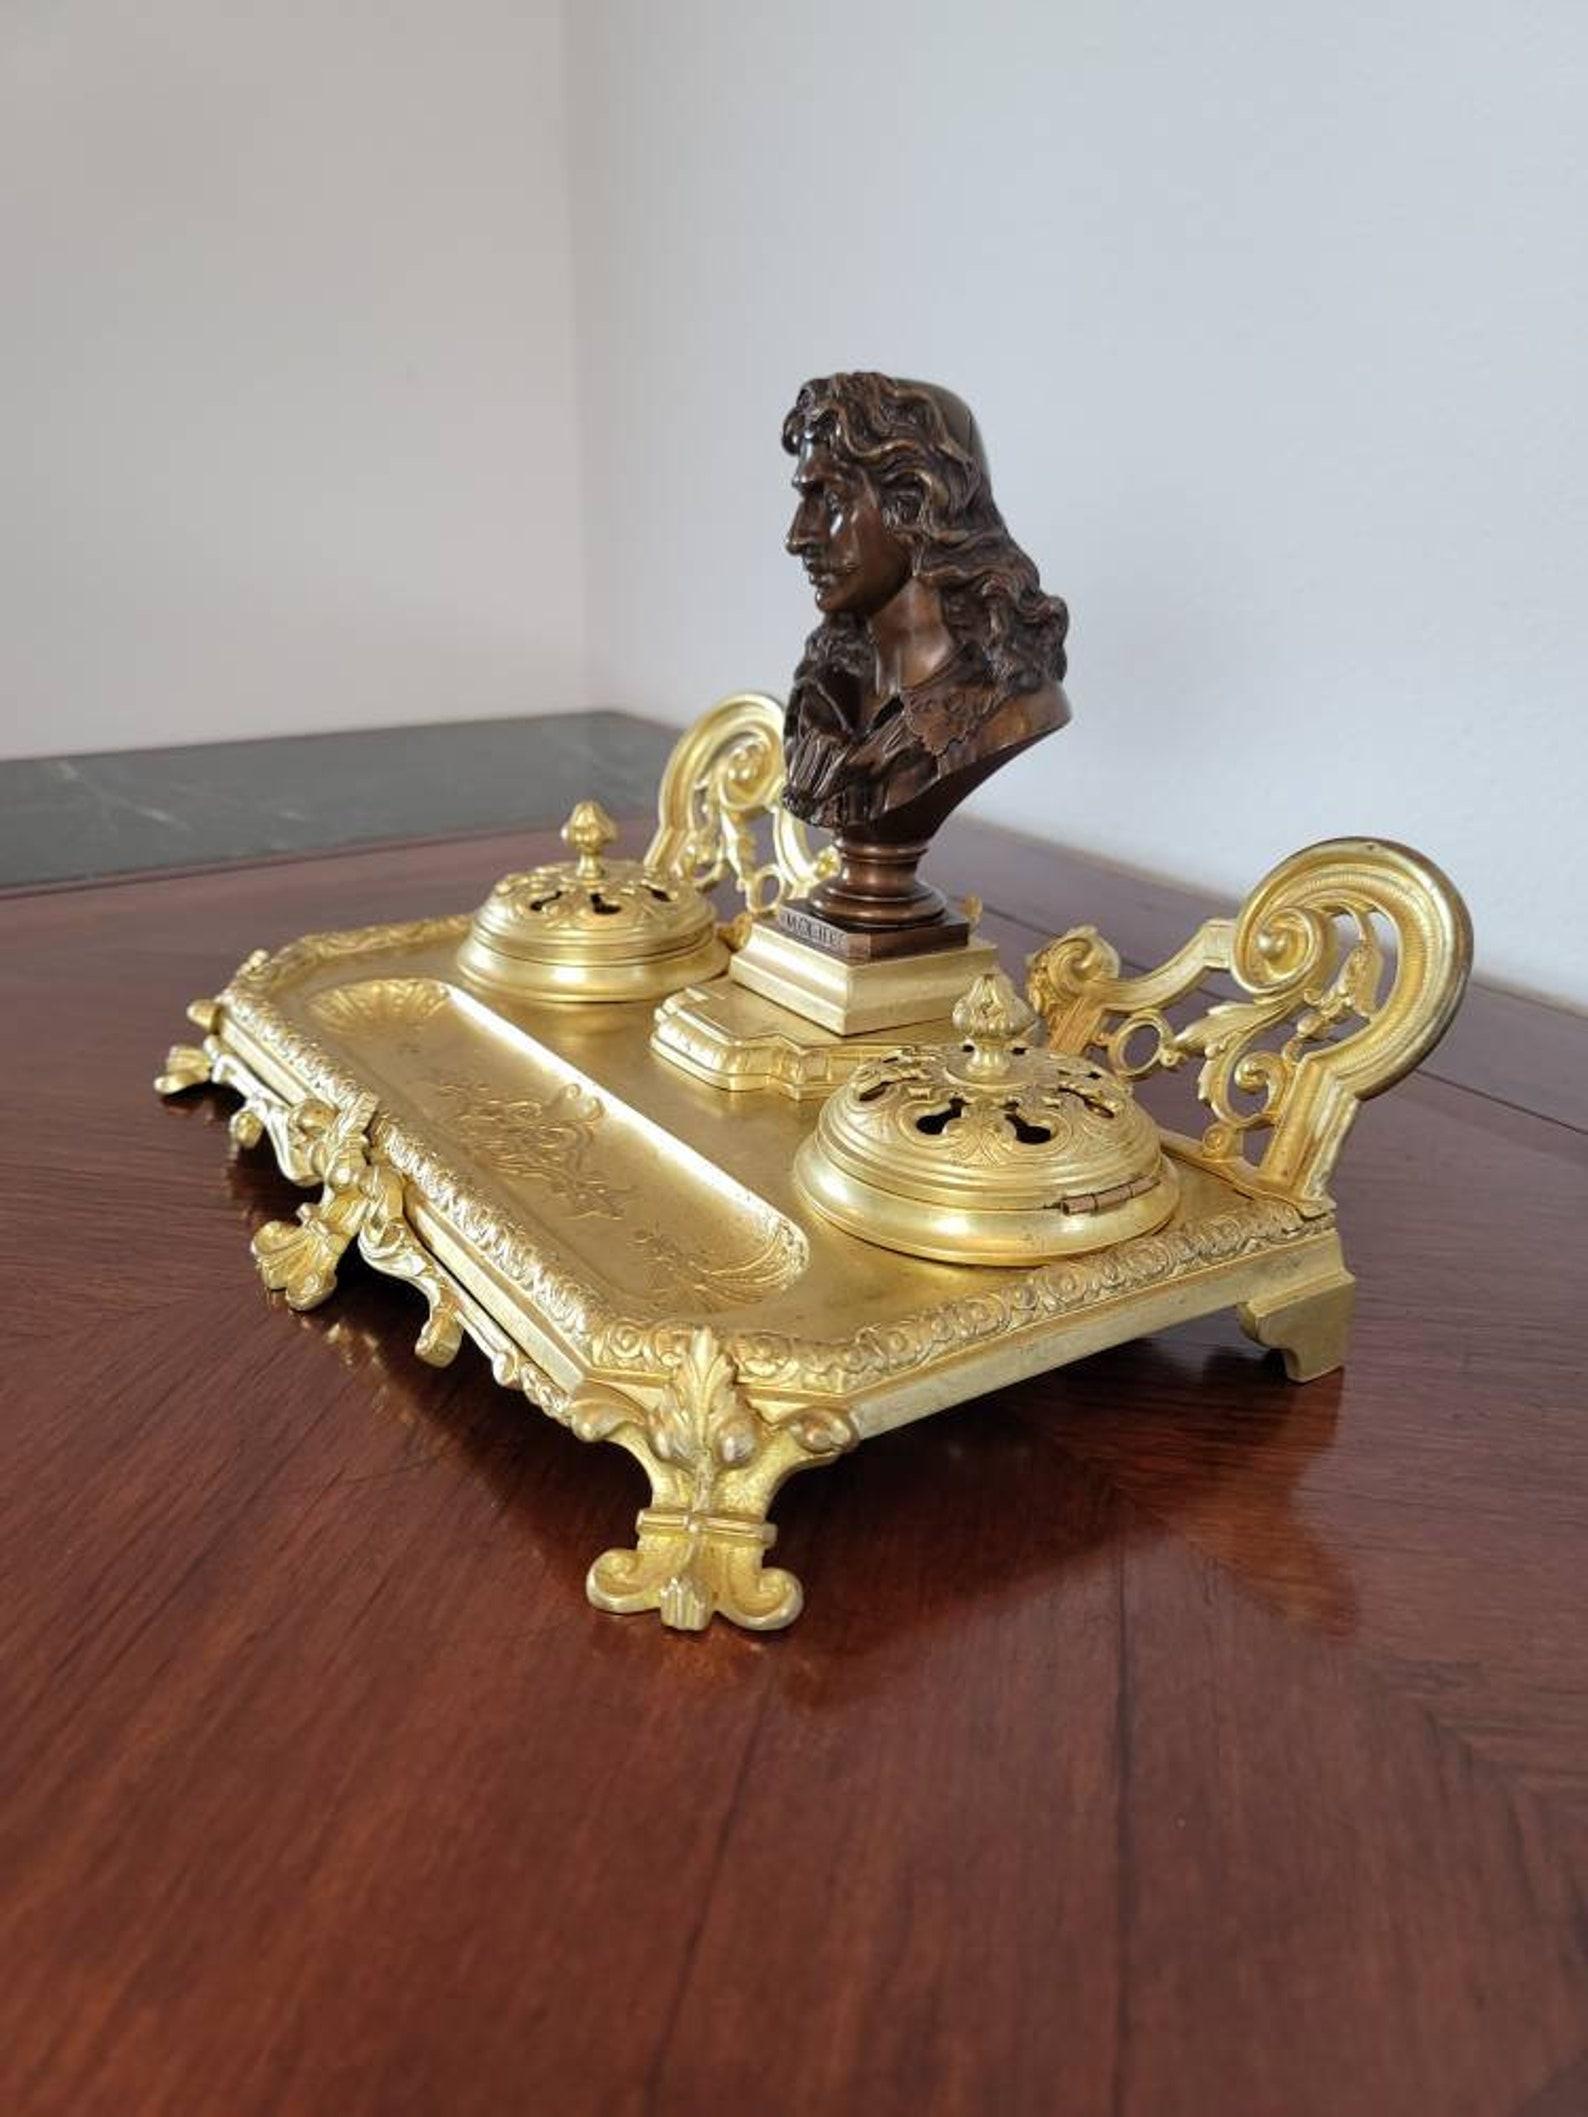 Antique French Gilt Bronze Encrier Inkwell Desk Stand, Signed JF For Sale 3